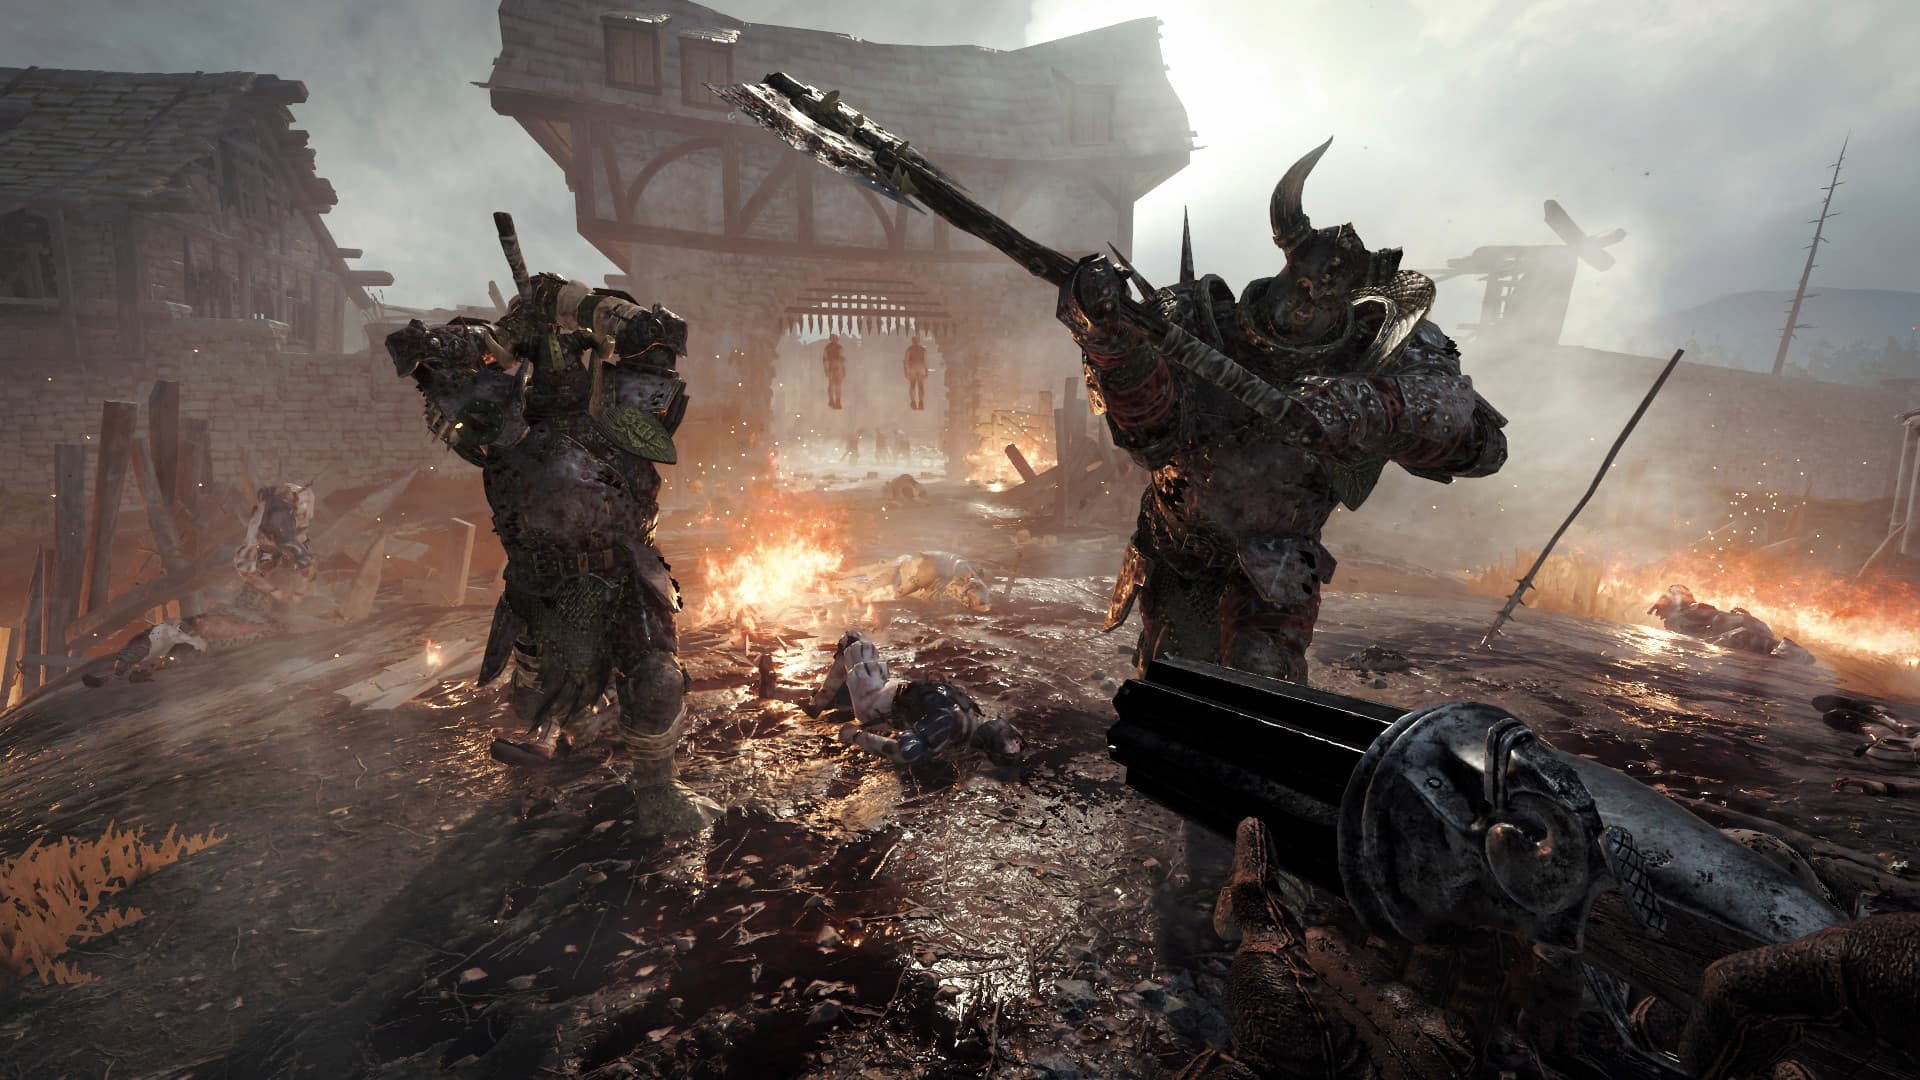 Vemintide 2 free screenshot where we see a player with a loaded gun and 2 large enemies charging toward them 